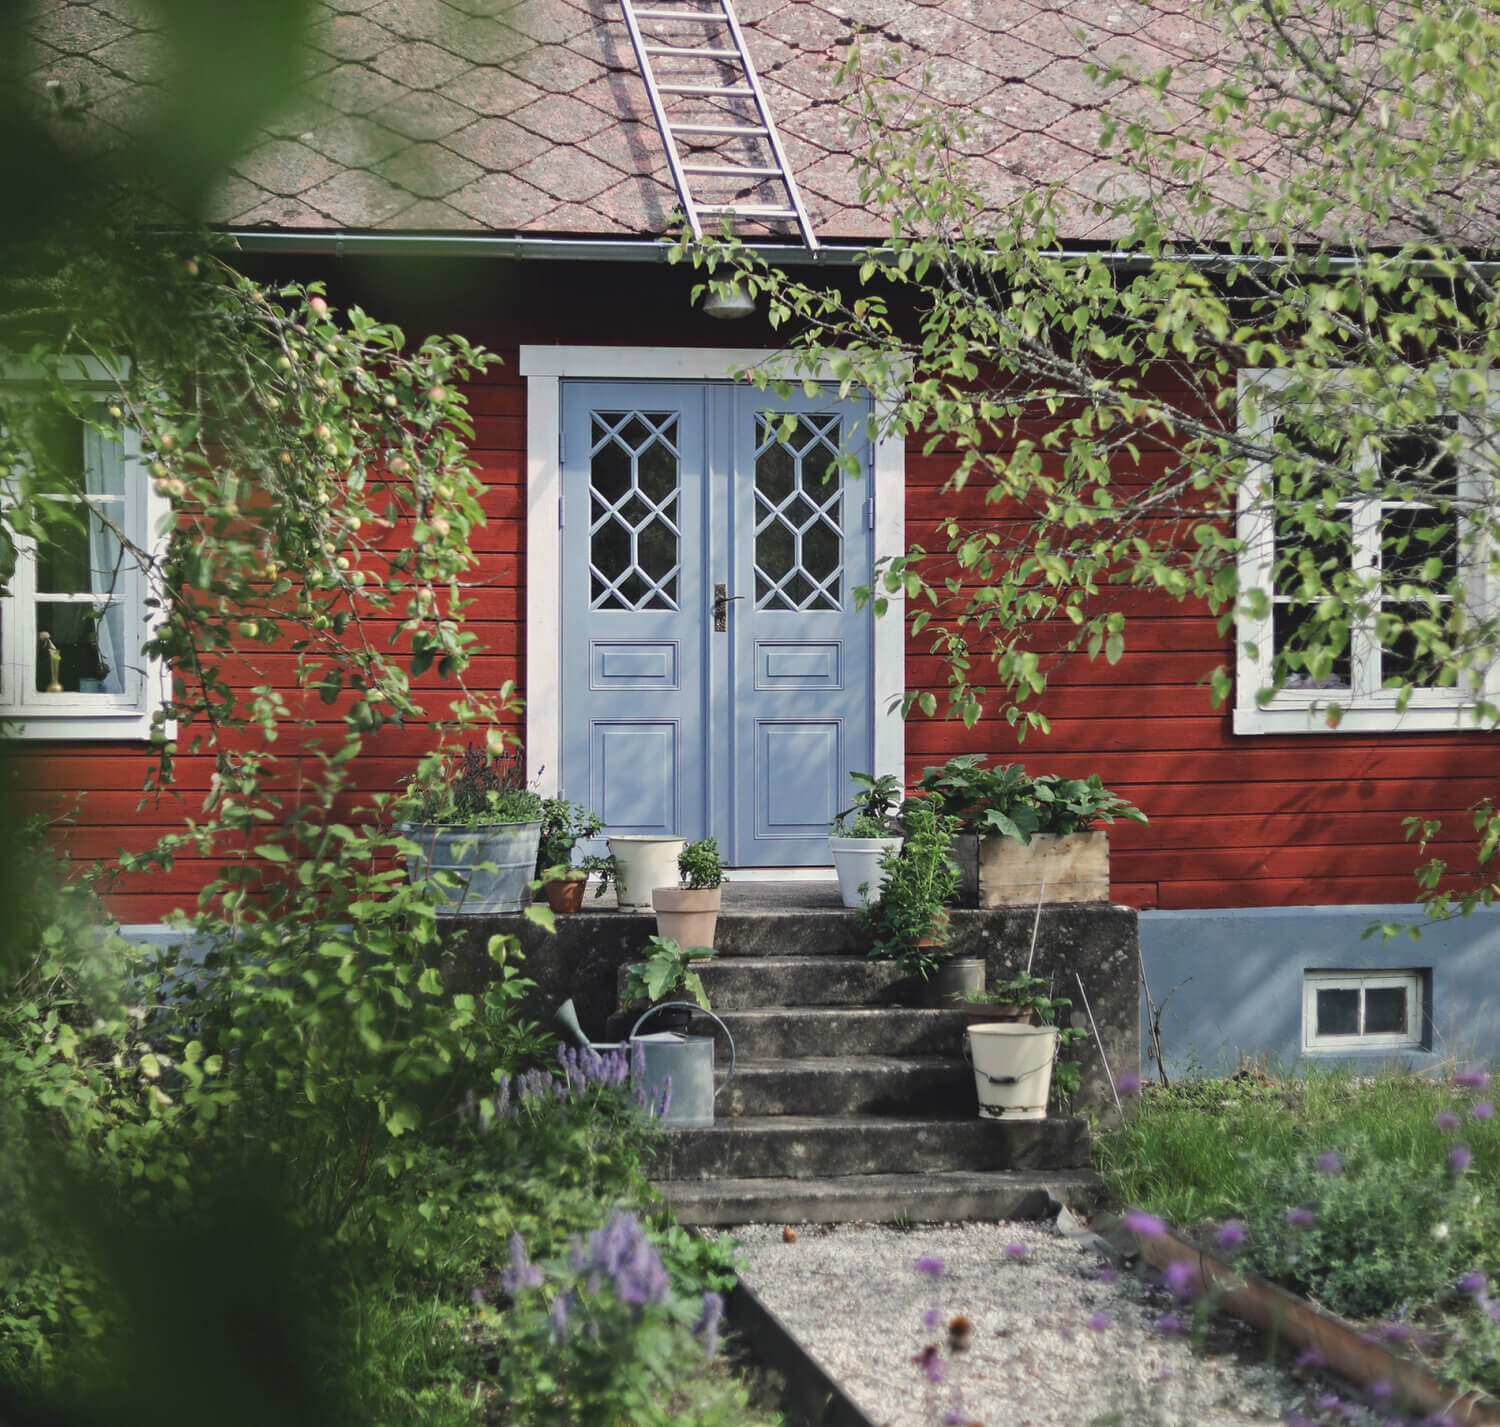 ASwedishCountryhousewithaDreamlikeGarden TheNordroom18 1 A Swedish Country House with a Dreamlike Garden